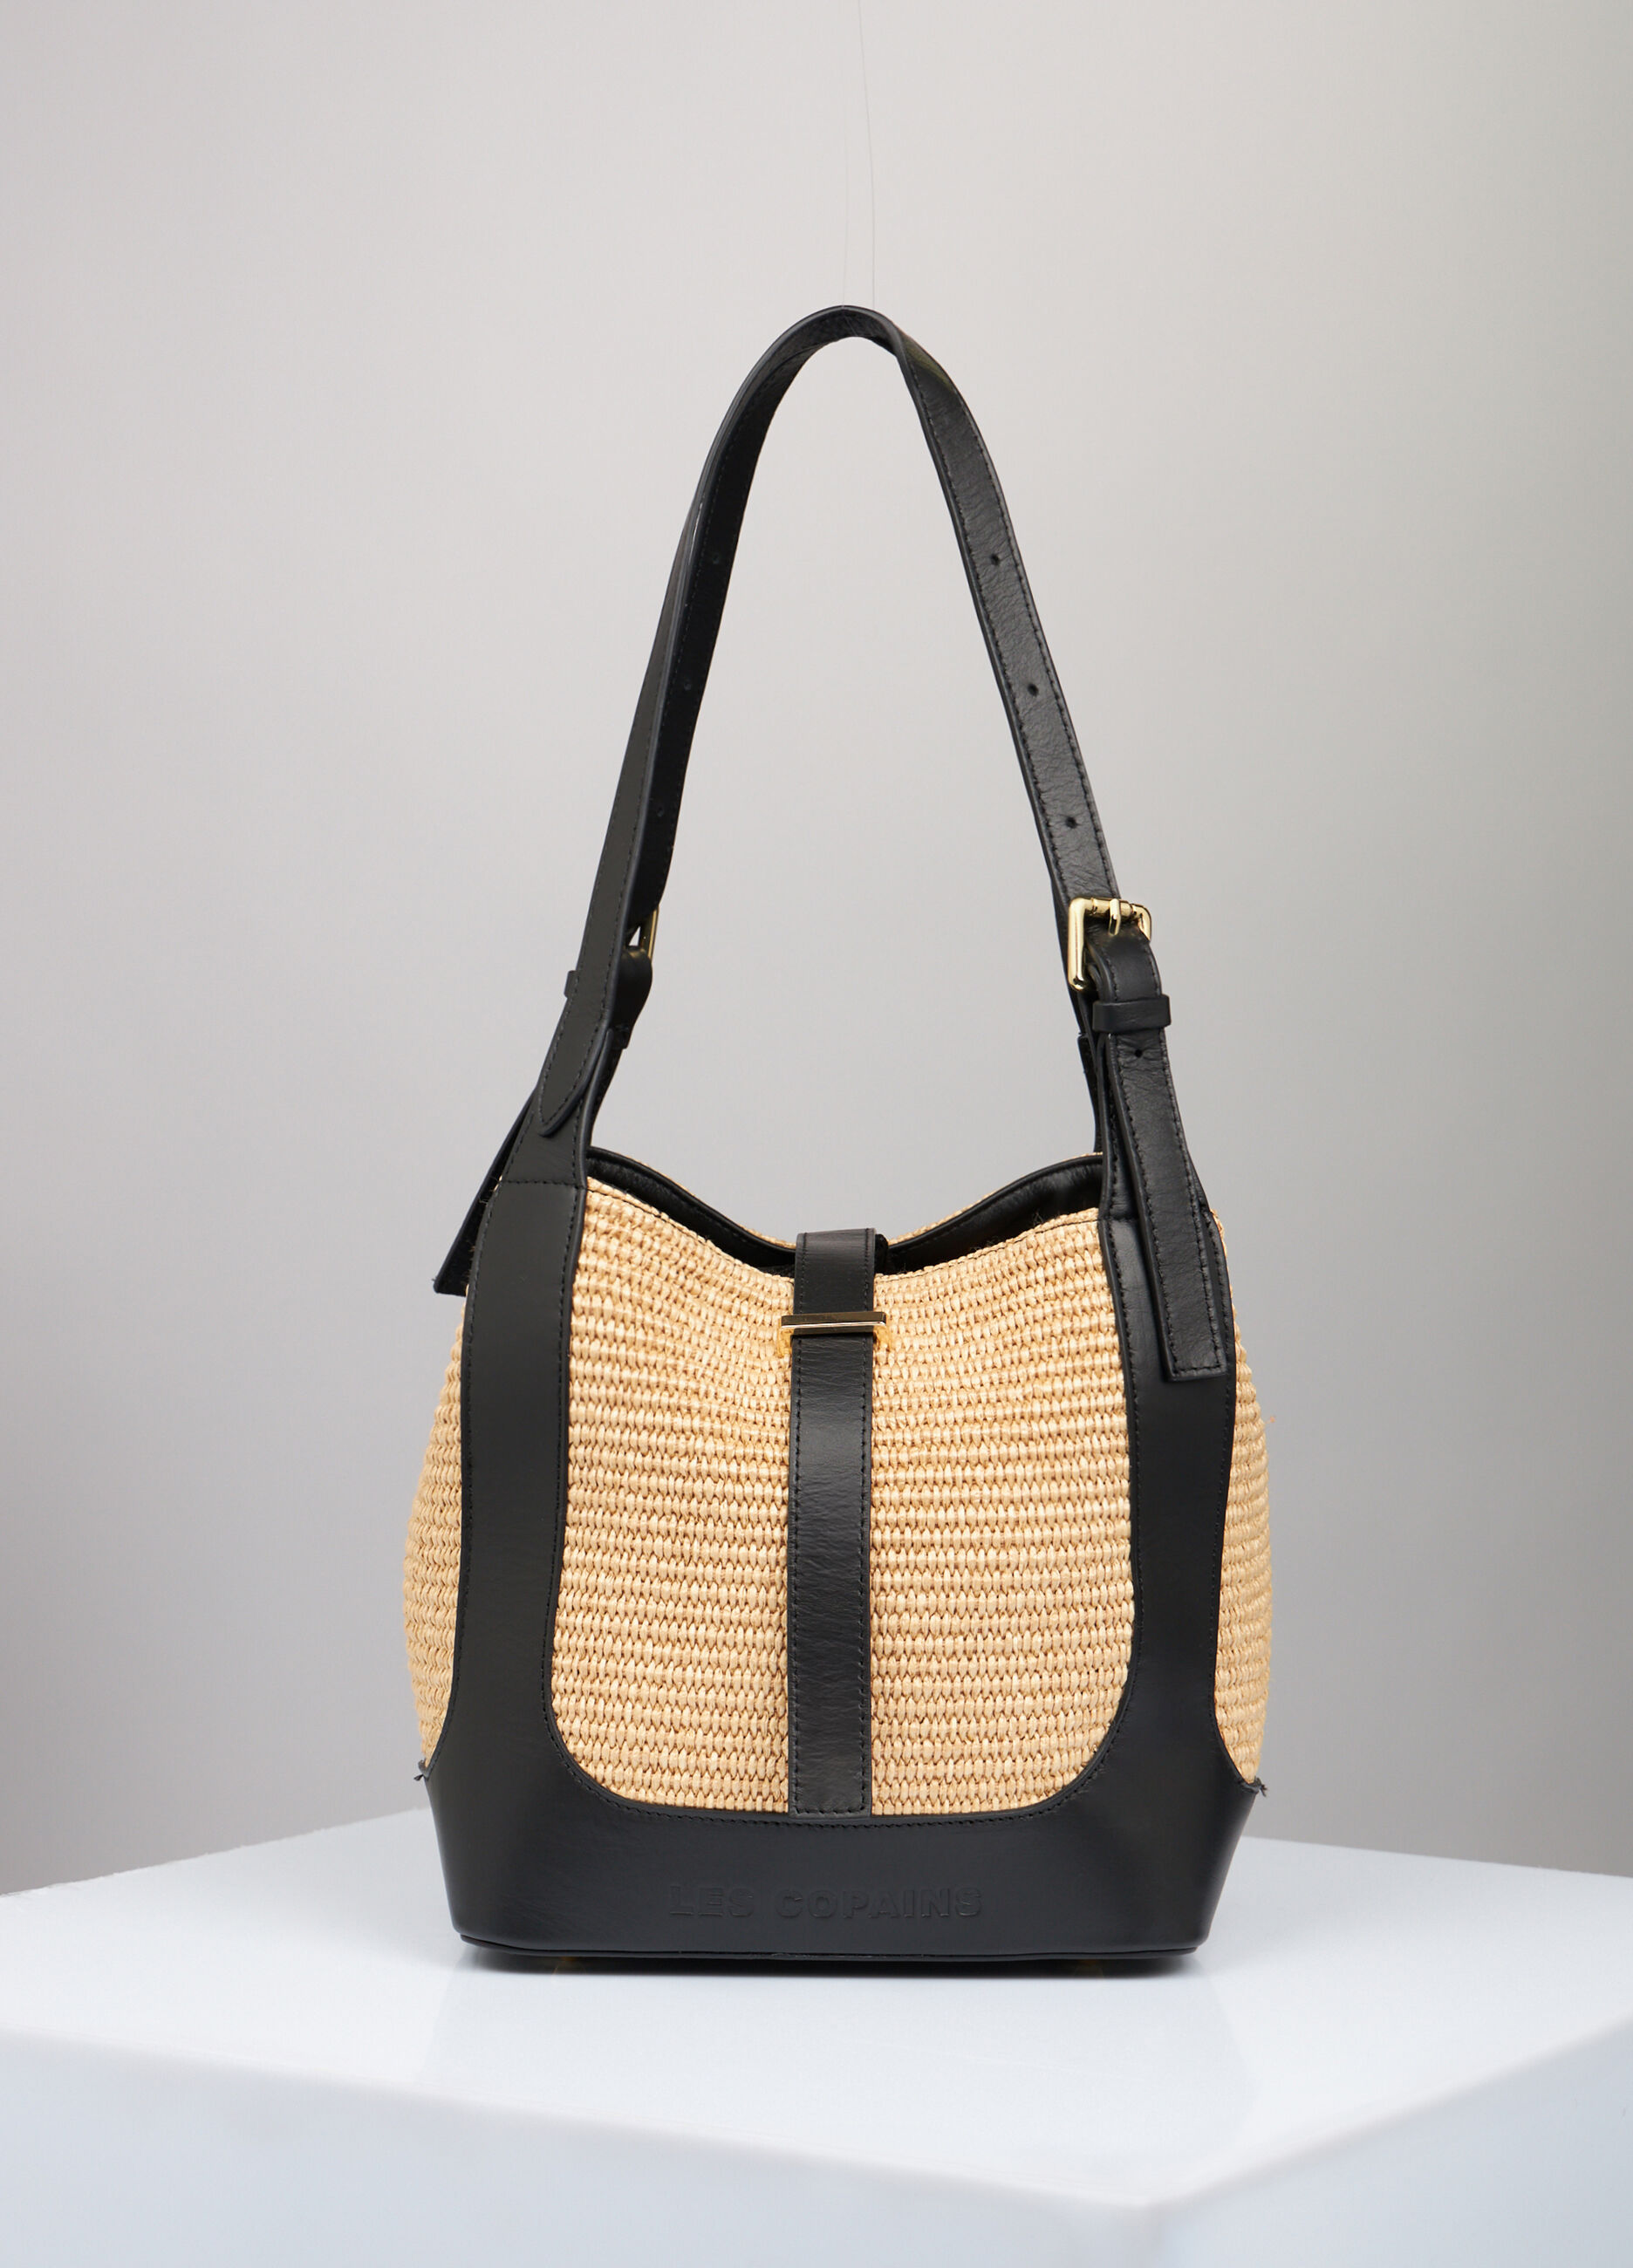 Bag in real leather and raffia